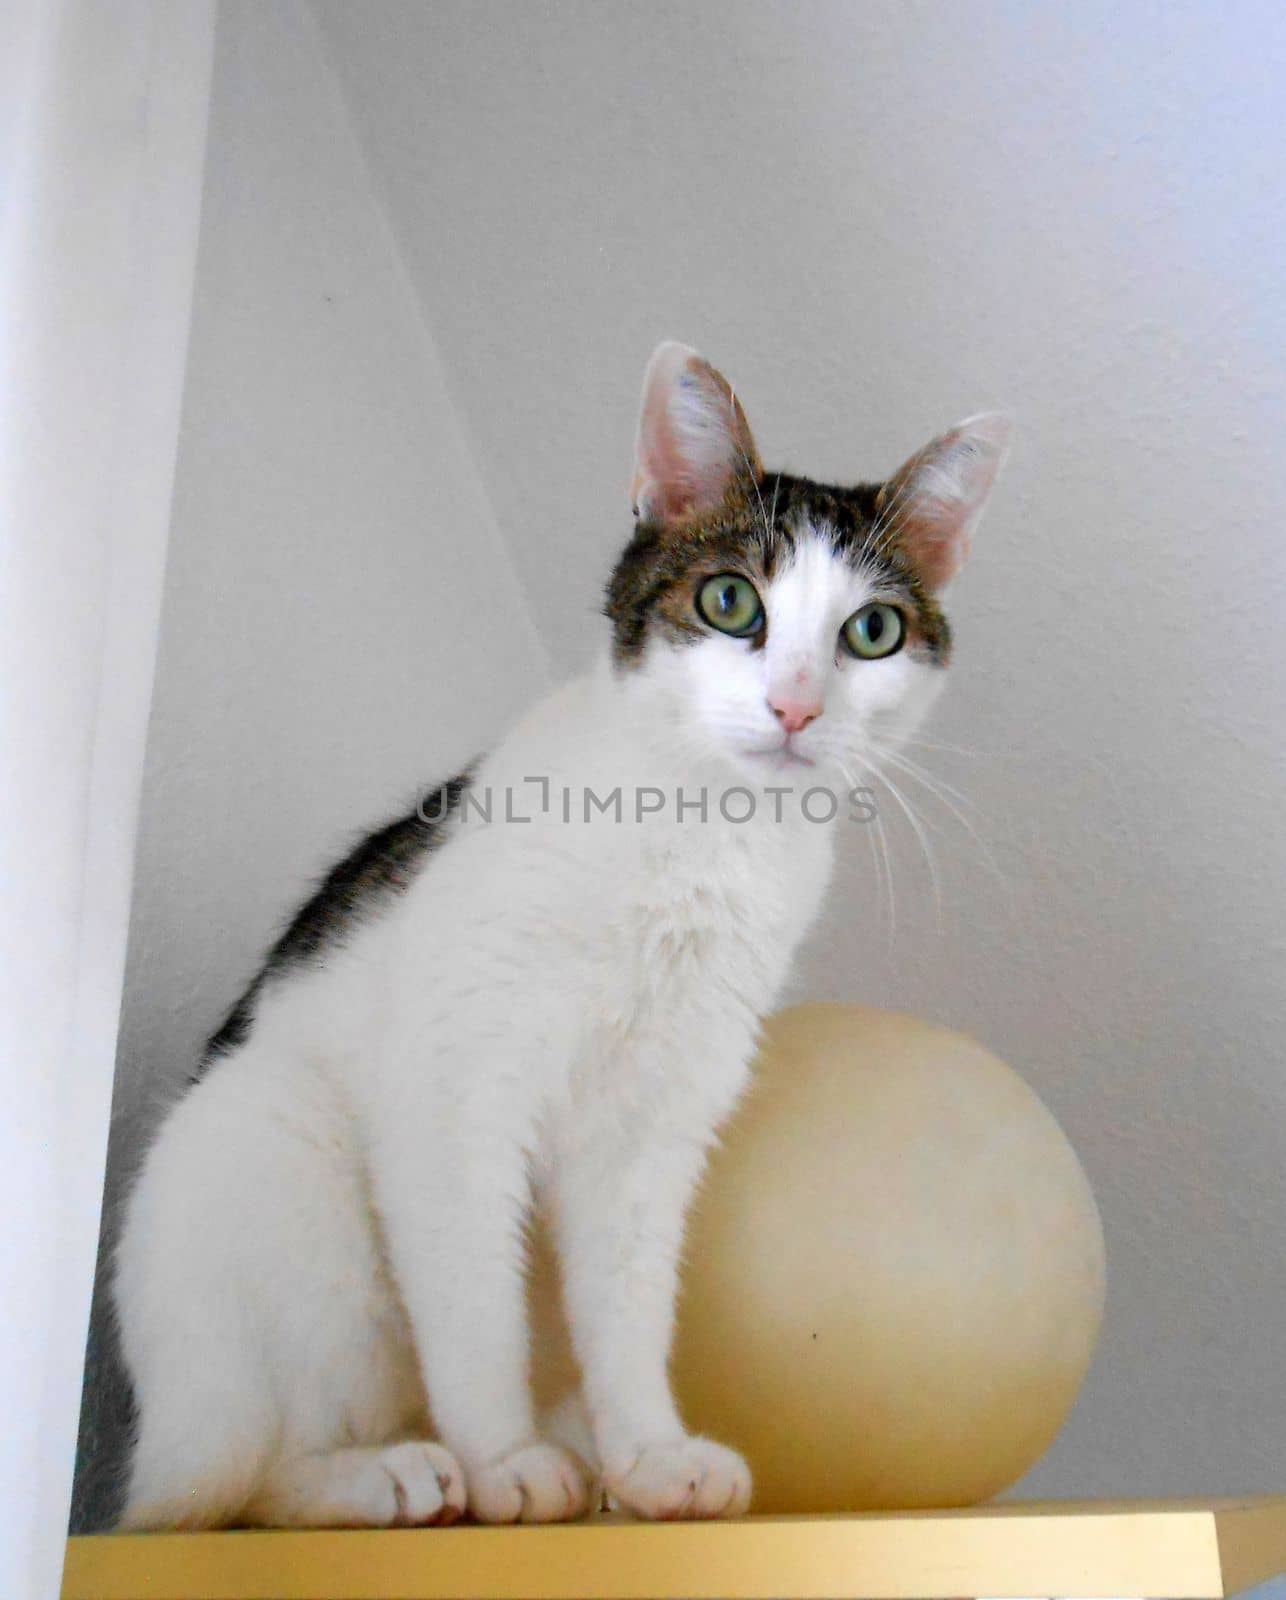 Tabby and white cat with huge eyes. A ball in the background